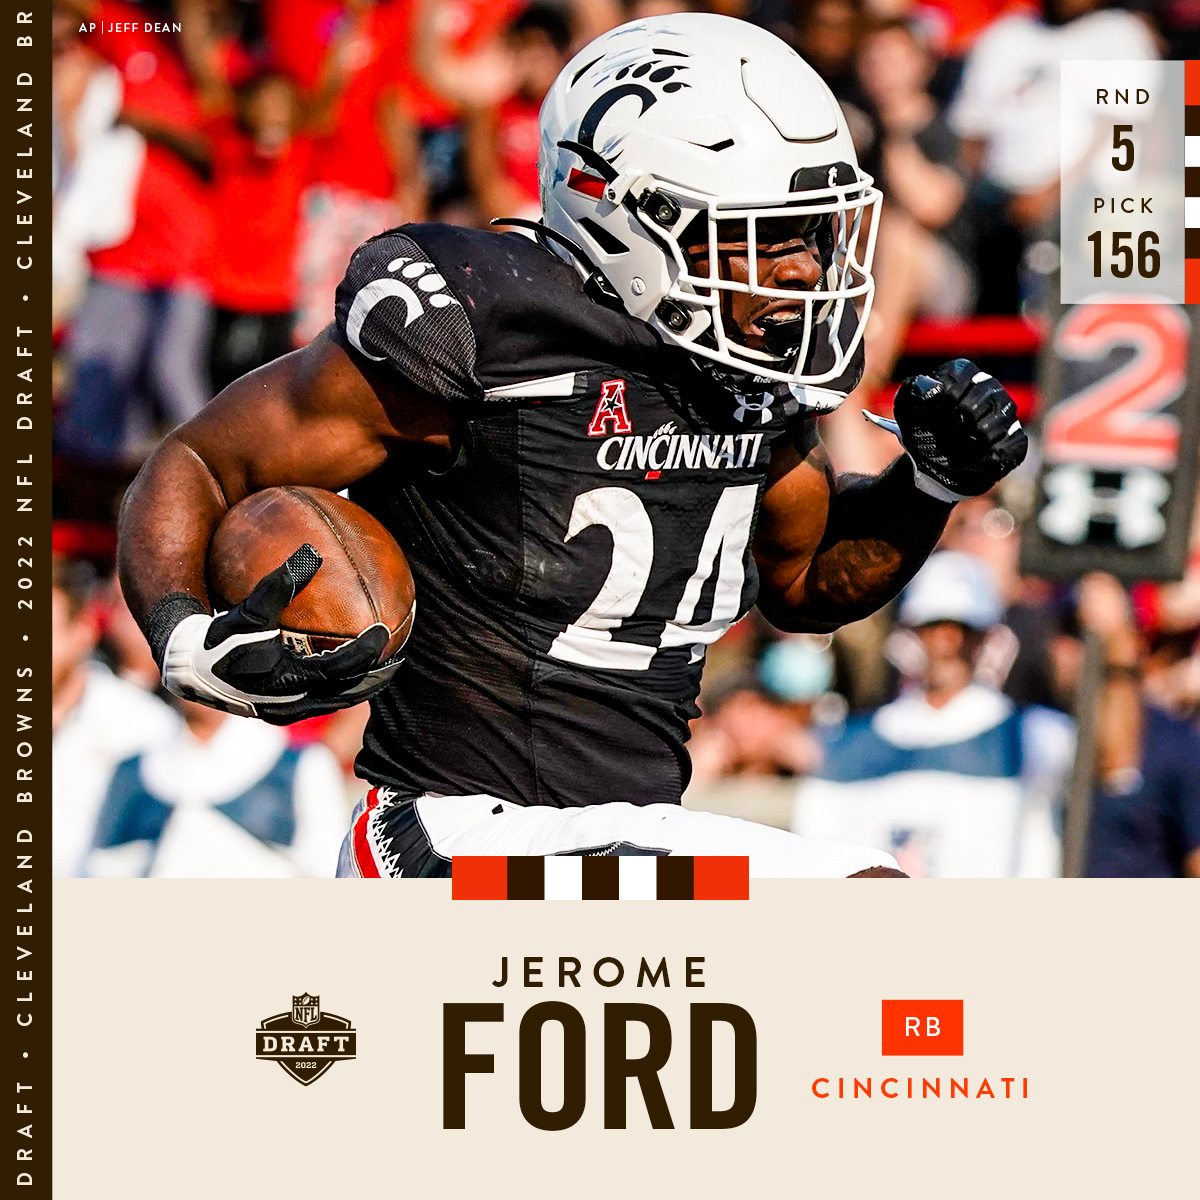 jerome ford nfl draft